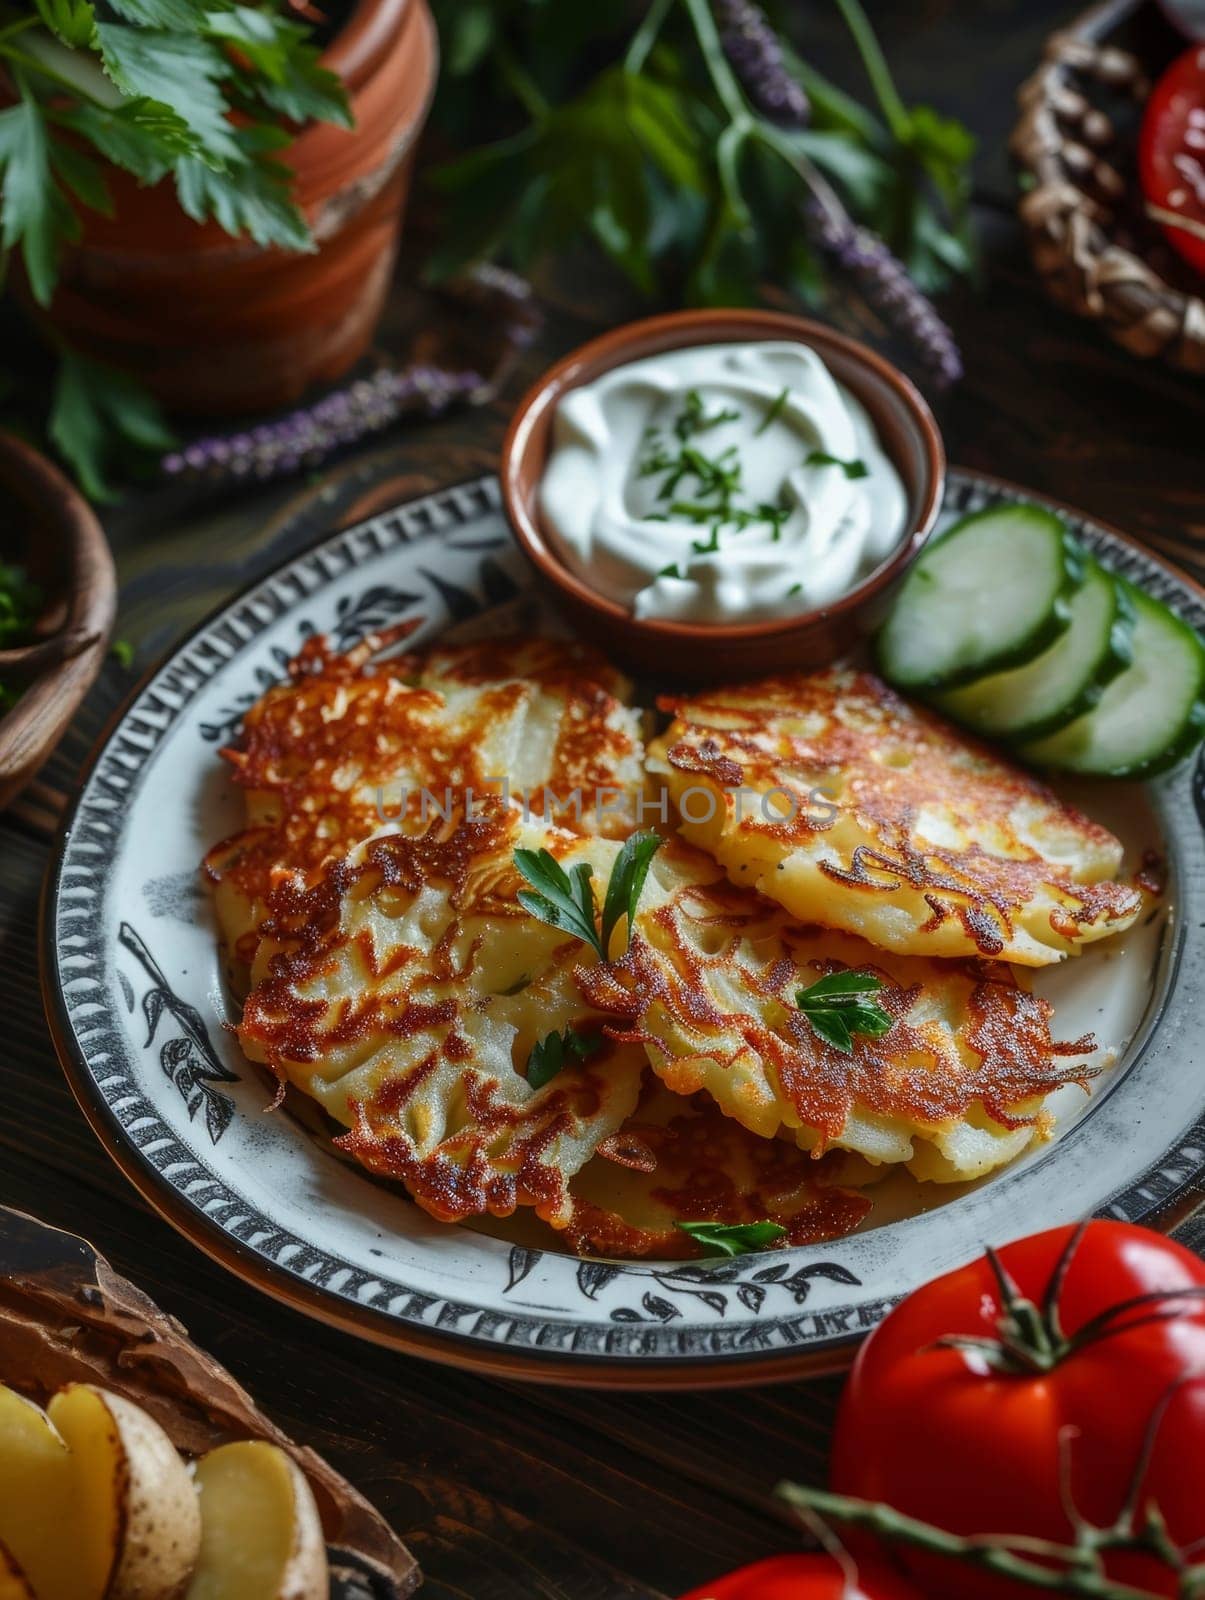 Belarusian draniki, thick and crispy potato pancakes, served on a traditional plate with a dollop of cool, creamy sour cream. This savory and comforting dish showcases the authentic flavors